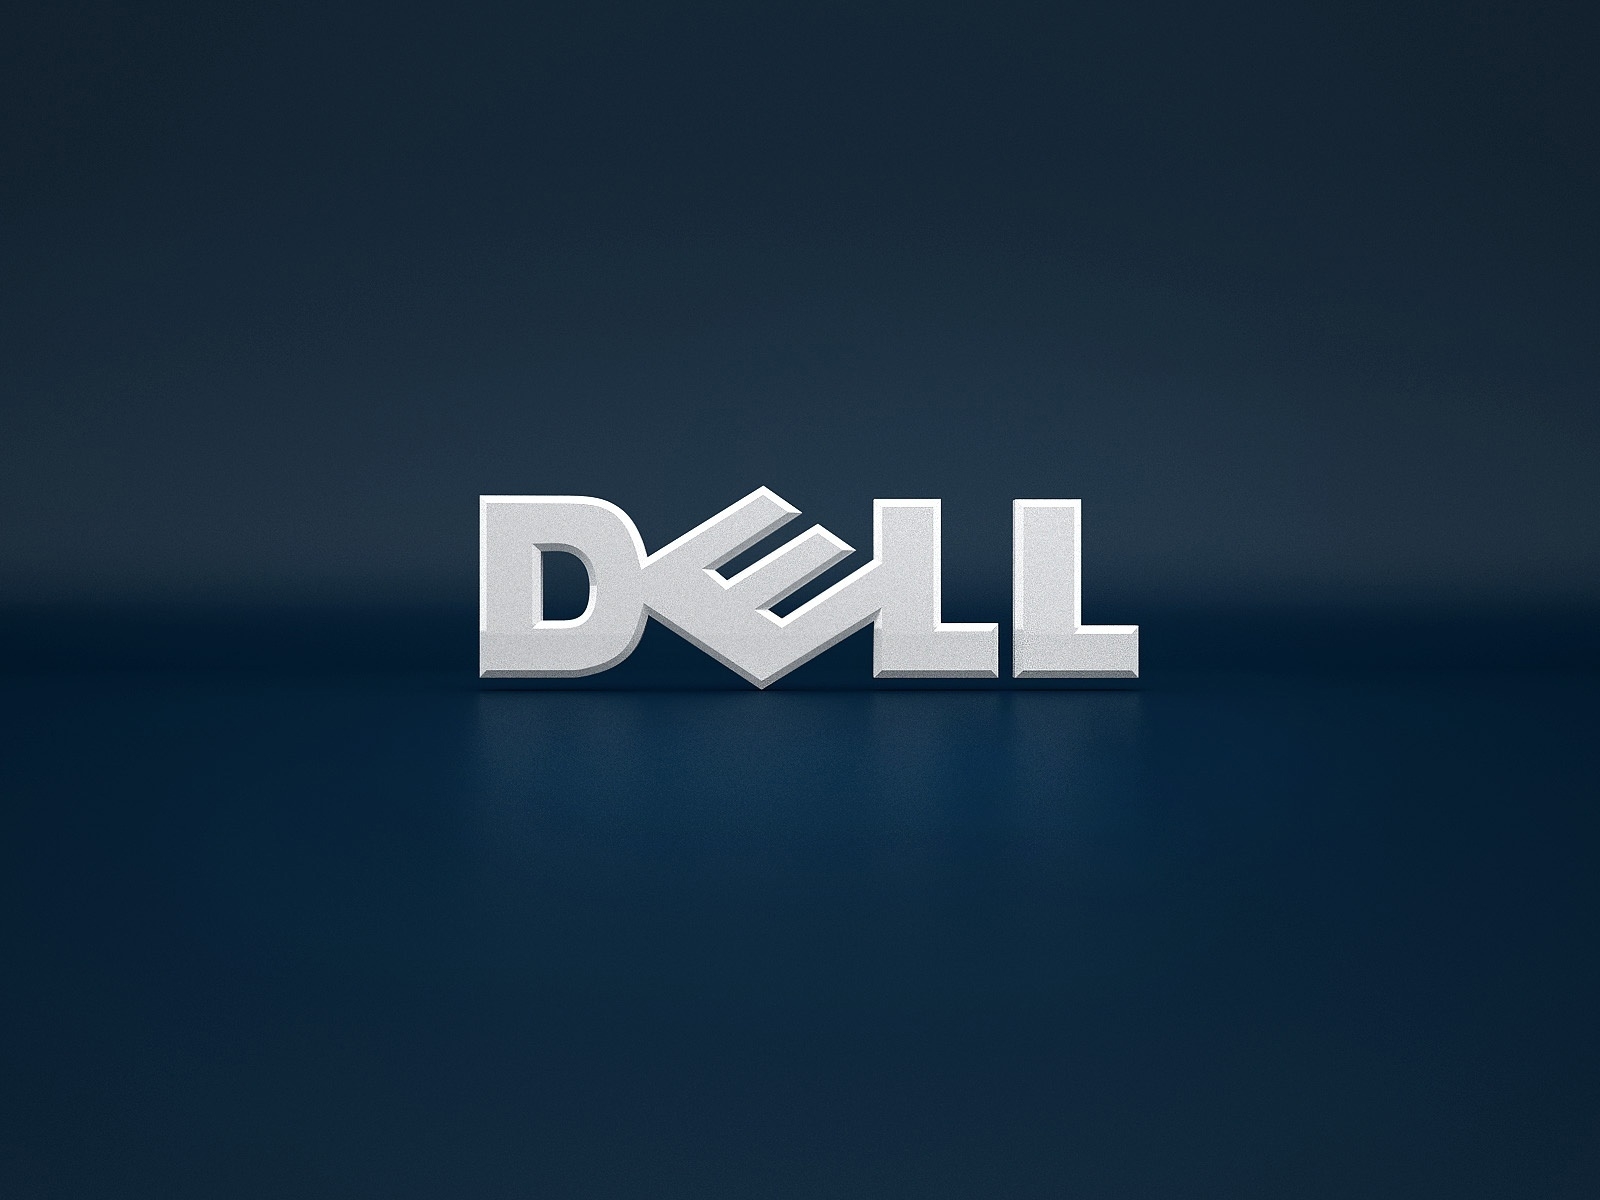 Dell blue background for 1600 x 1200 resolution